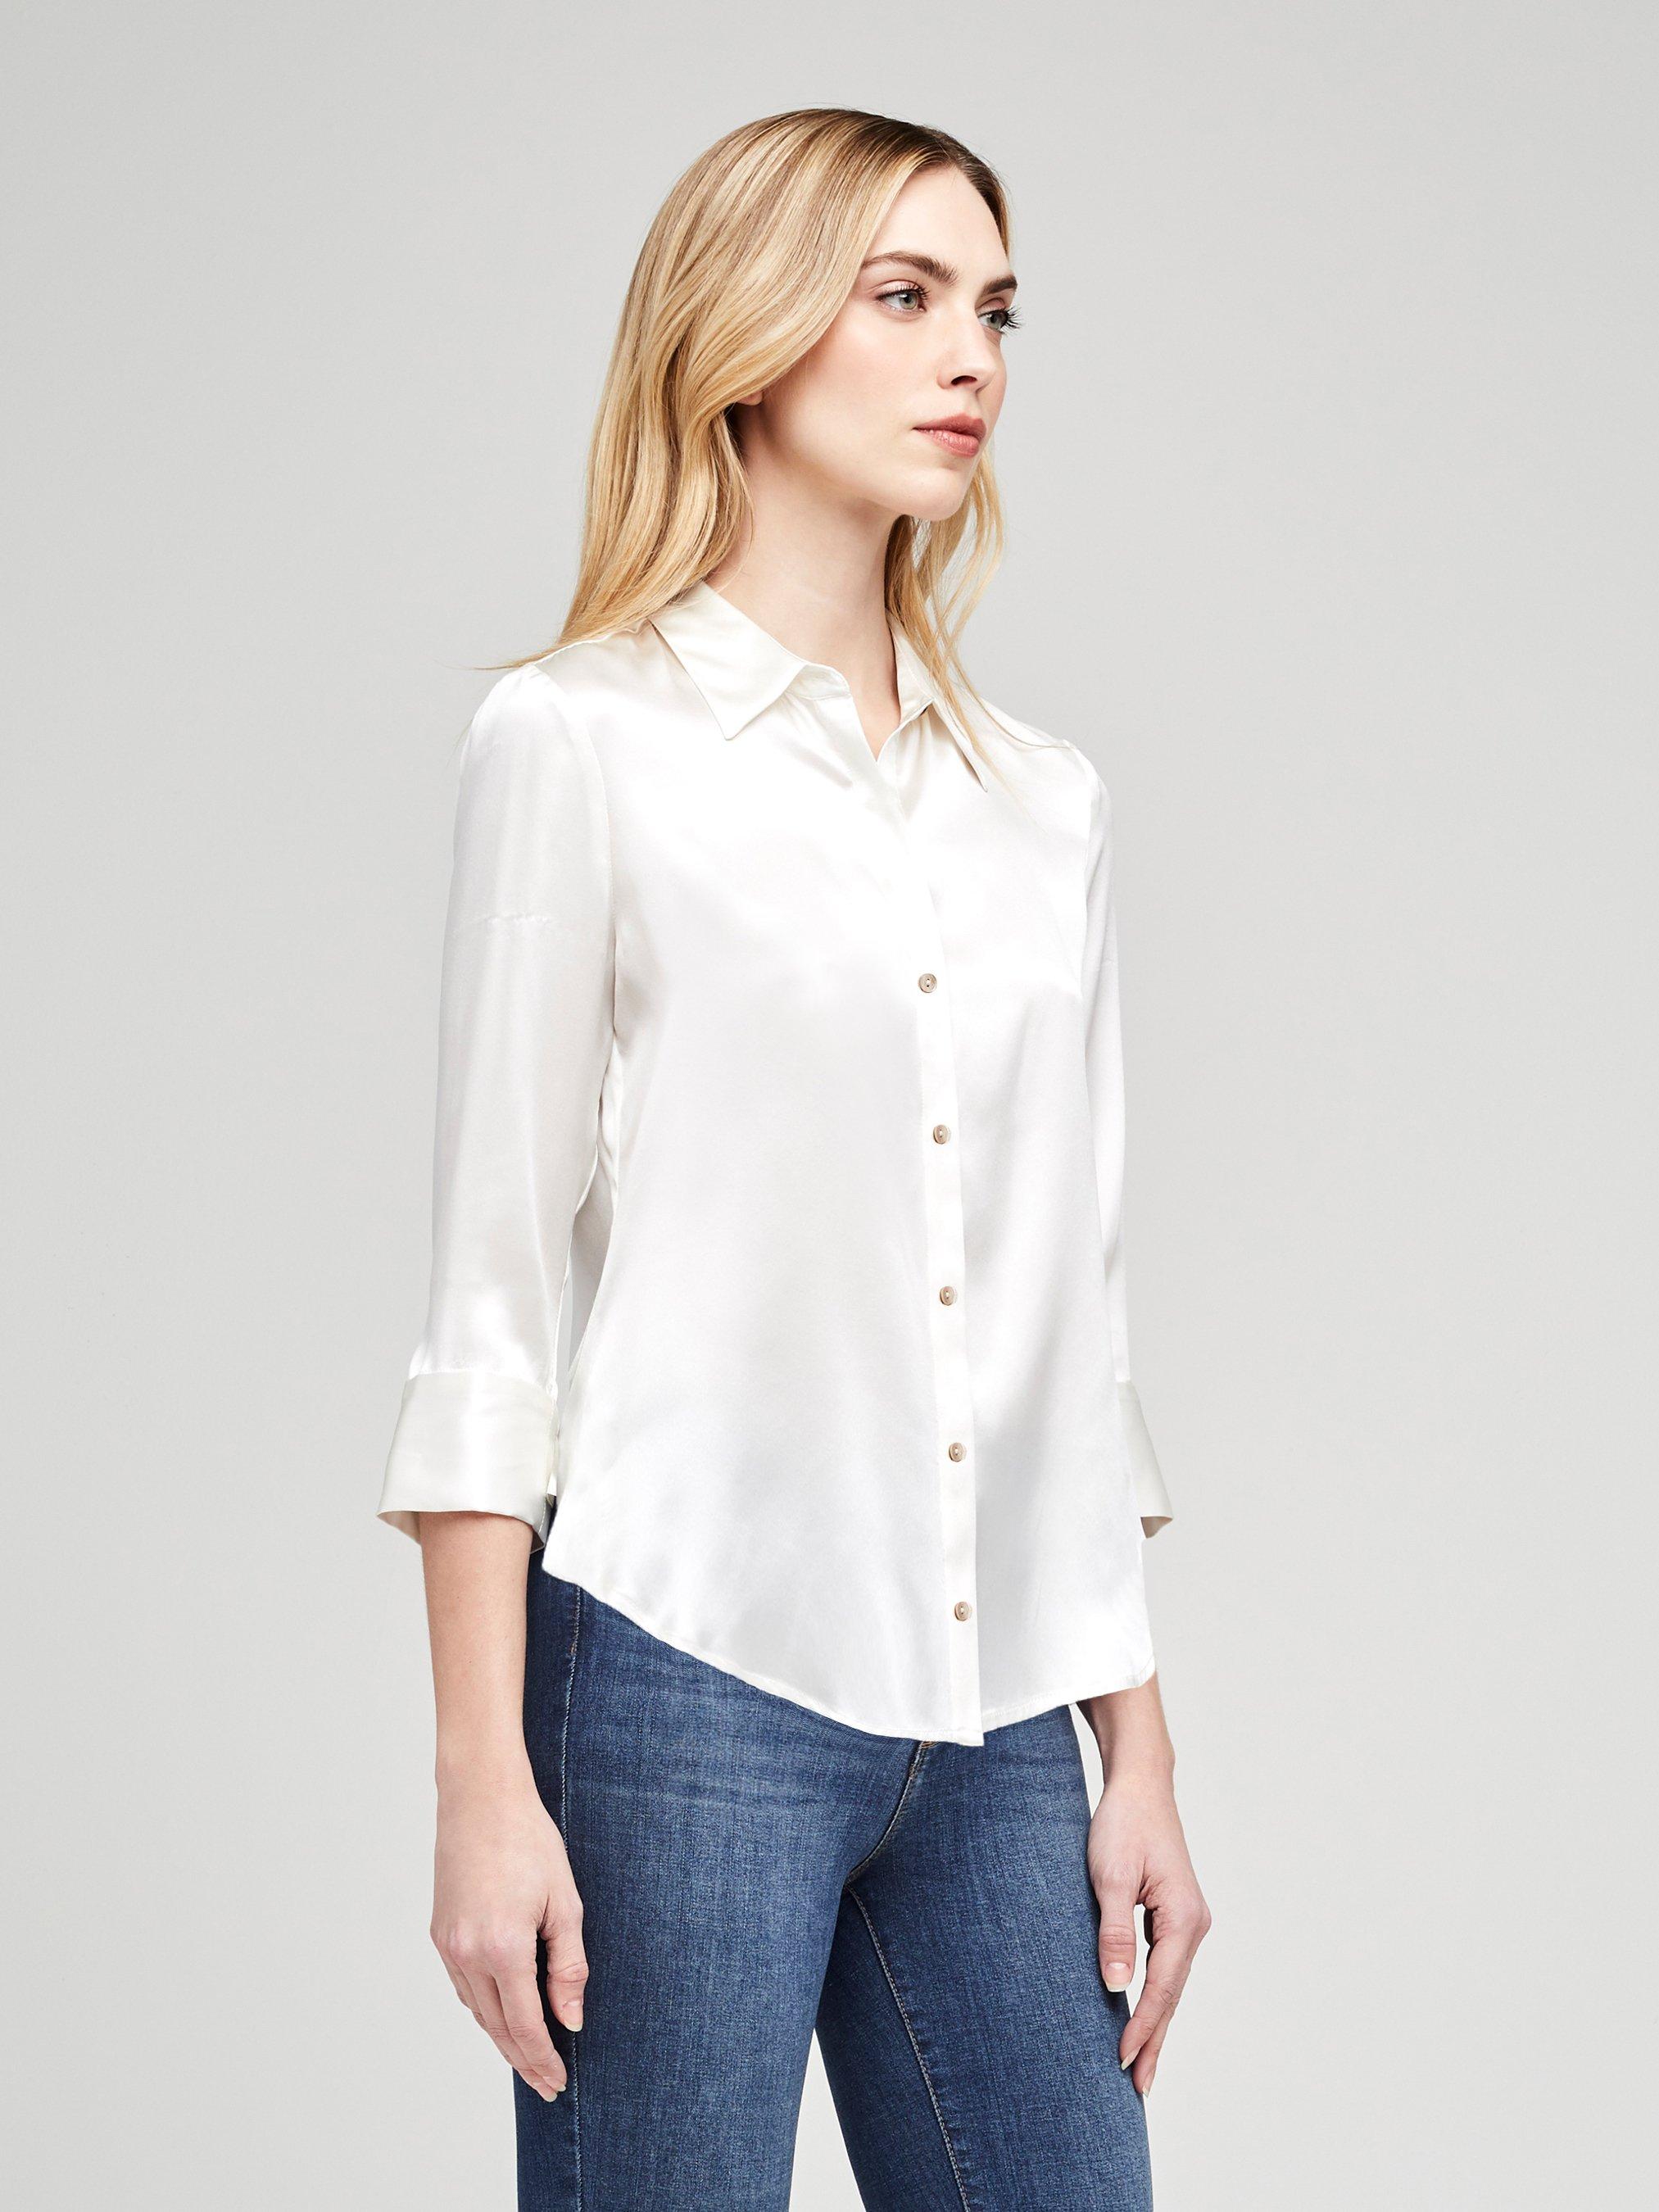 L'Agence Silk Dani Blouse in Ivory (White) - Lyst